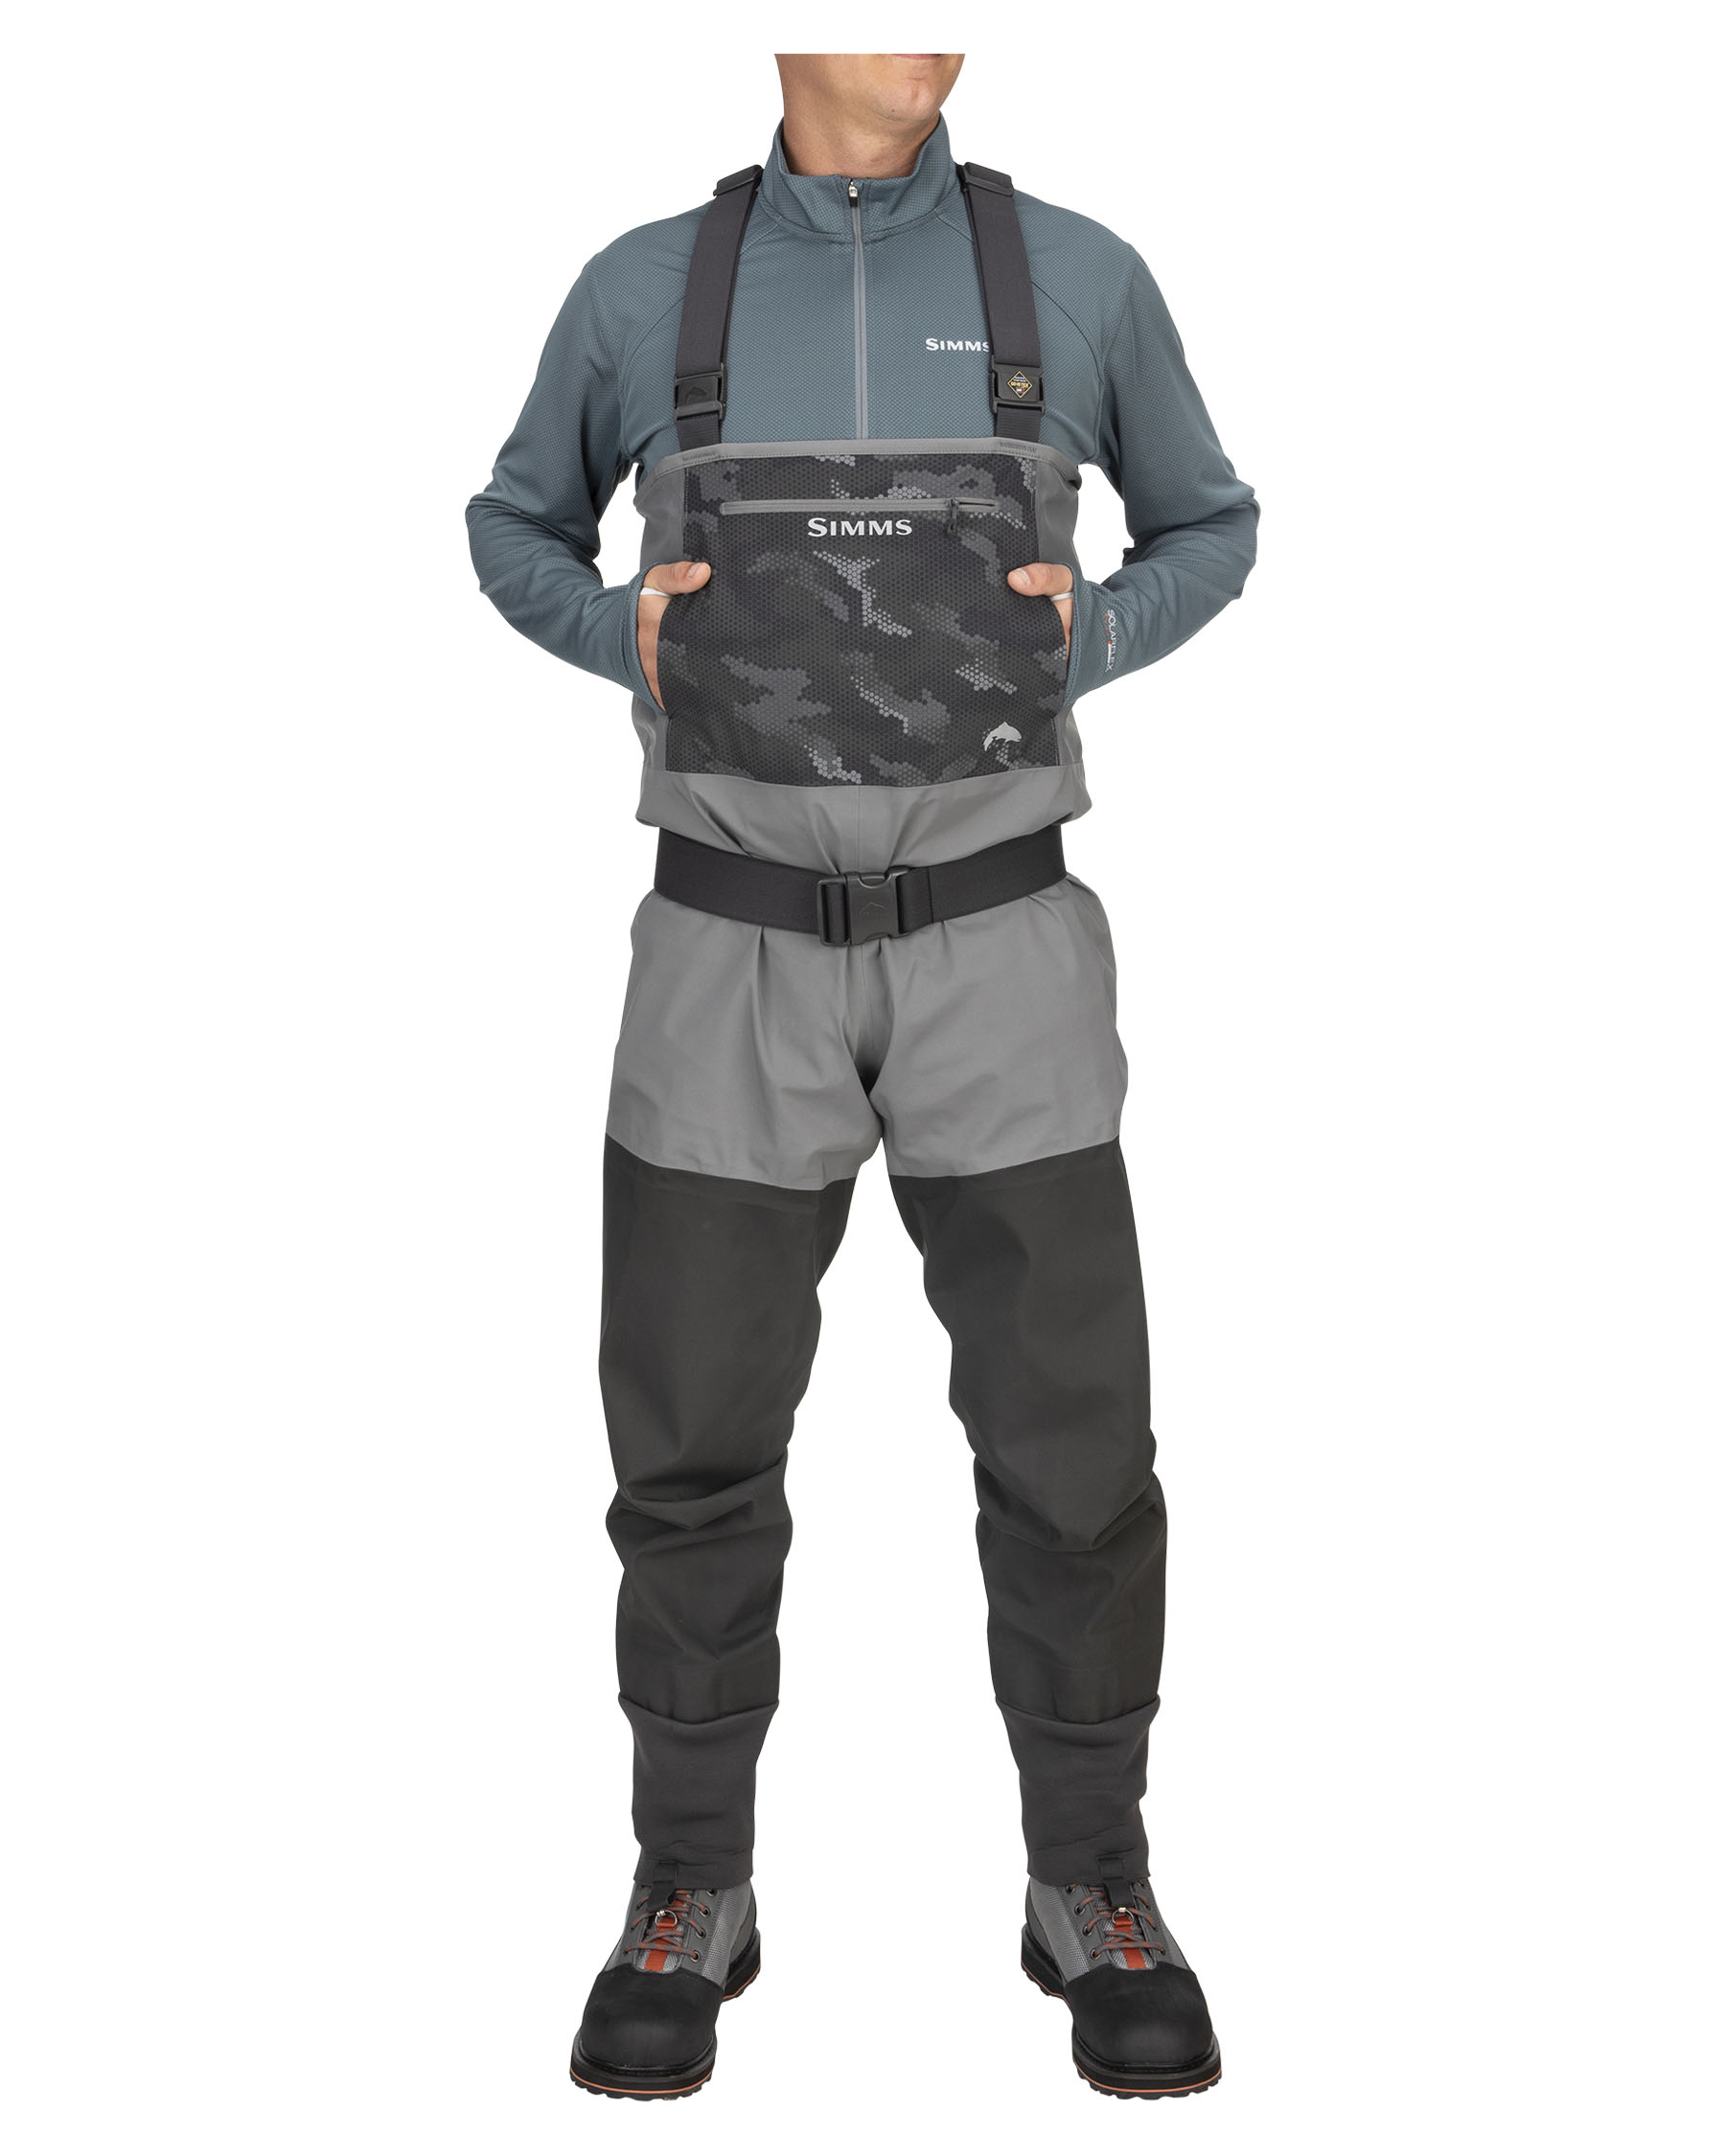 Waterproof and Breathable Fly Fishing Waders with Built-in Gravel Guard Simms Soul River Stockingfoot Chest Waders for Men